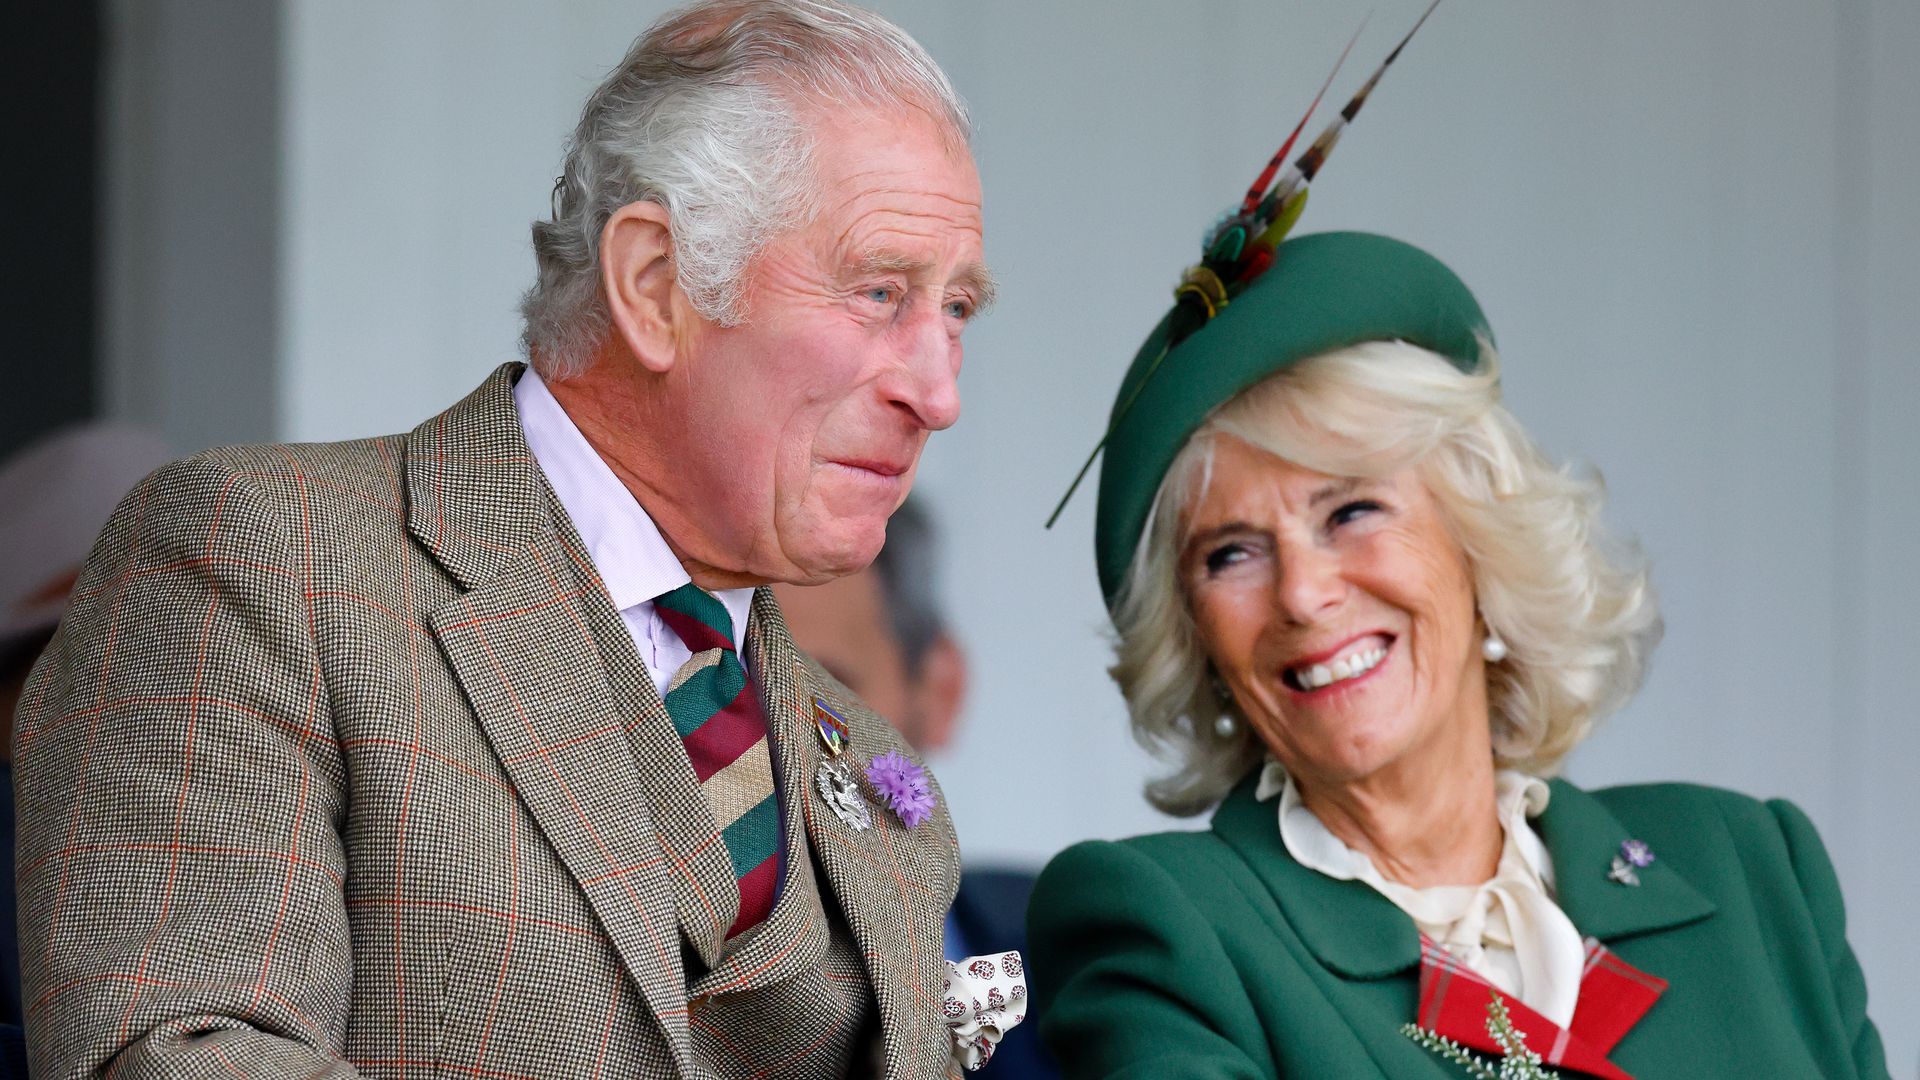 King Charles and Queen Consort Camilla laughing together at the Braemar Games in 2022